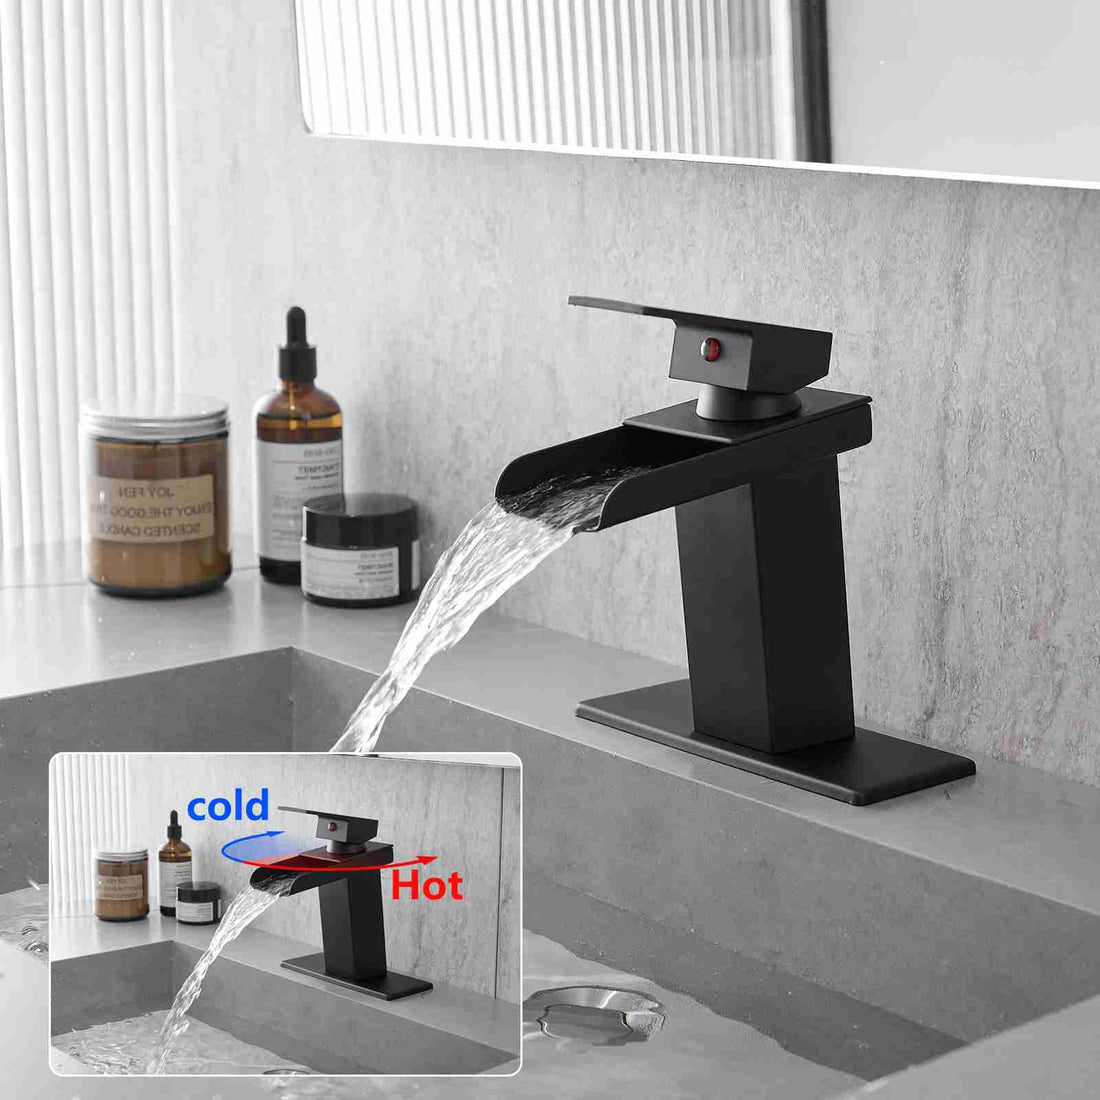 Matte Black Waterfall Bathroom Sink Faucet Suit for 1 or 3 Hole 2 Color opt